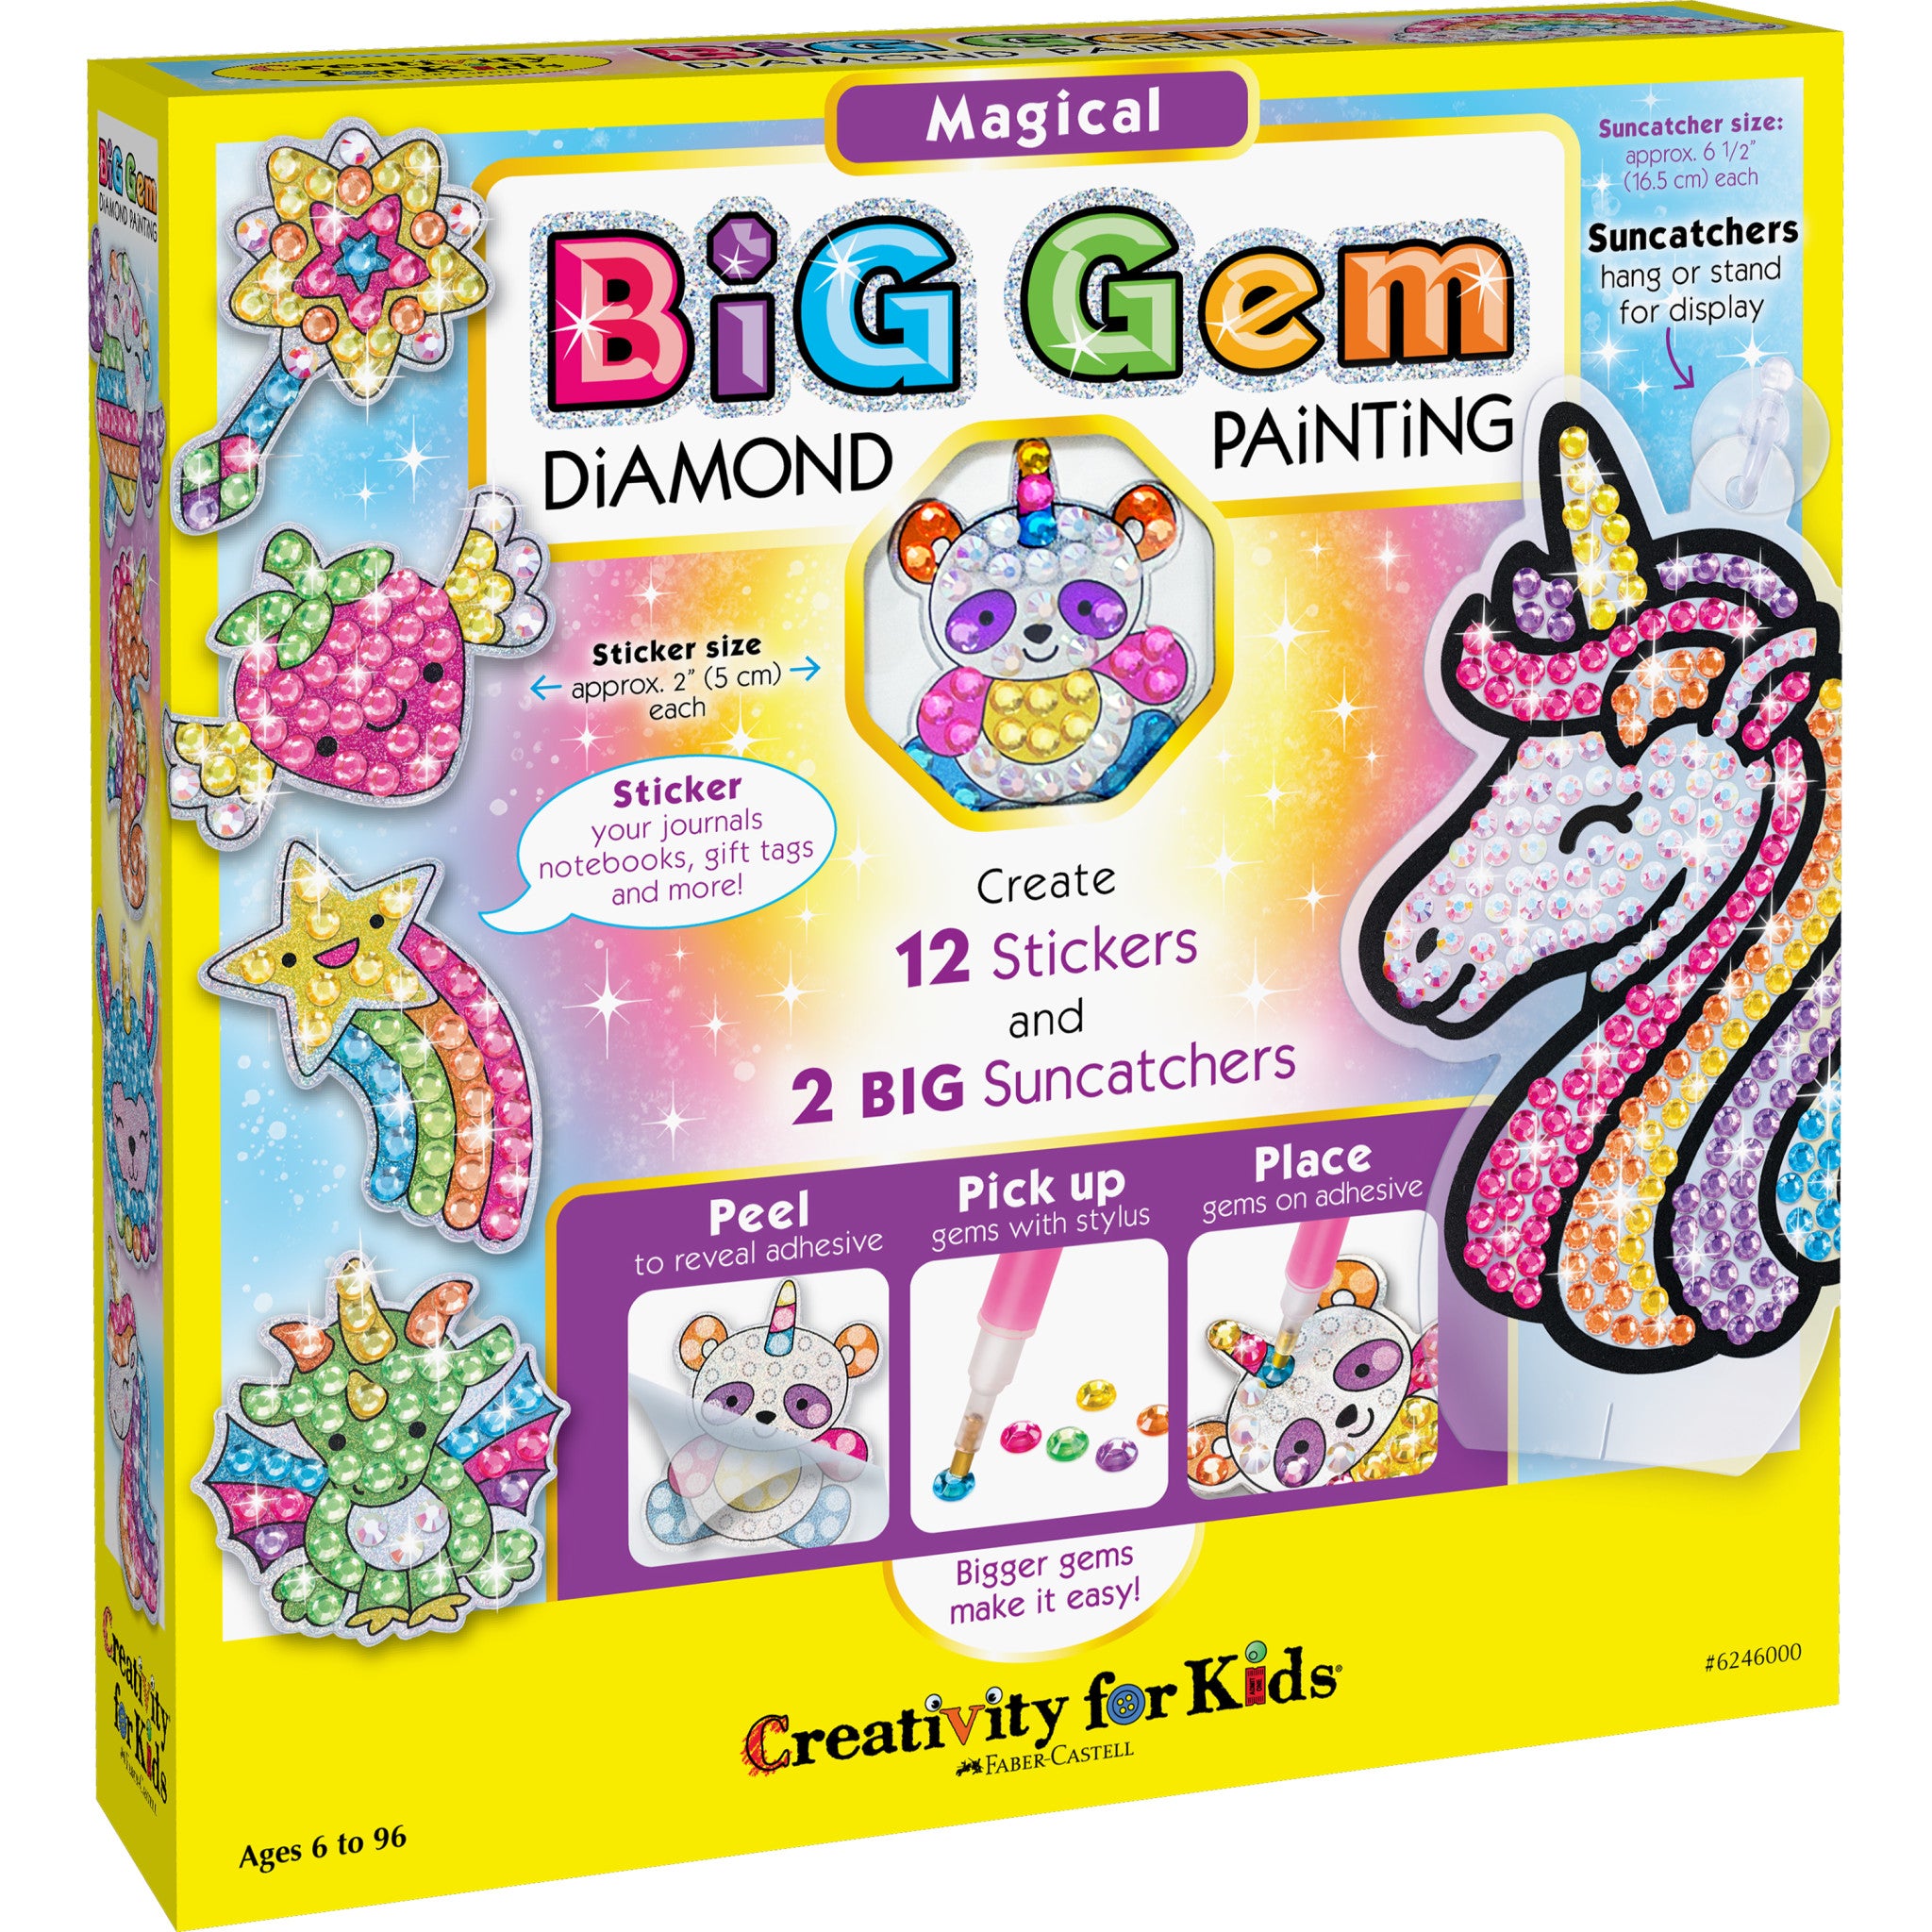 The Best Diamond Painting Kits for Kids - That Kids' Craft Site